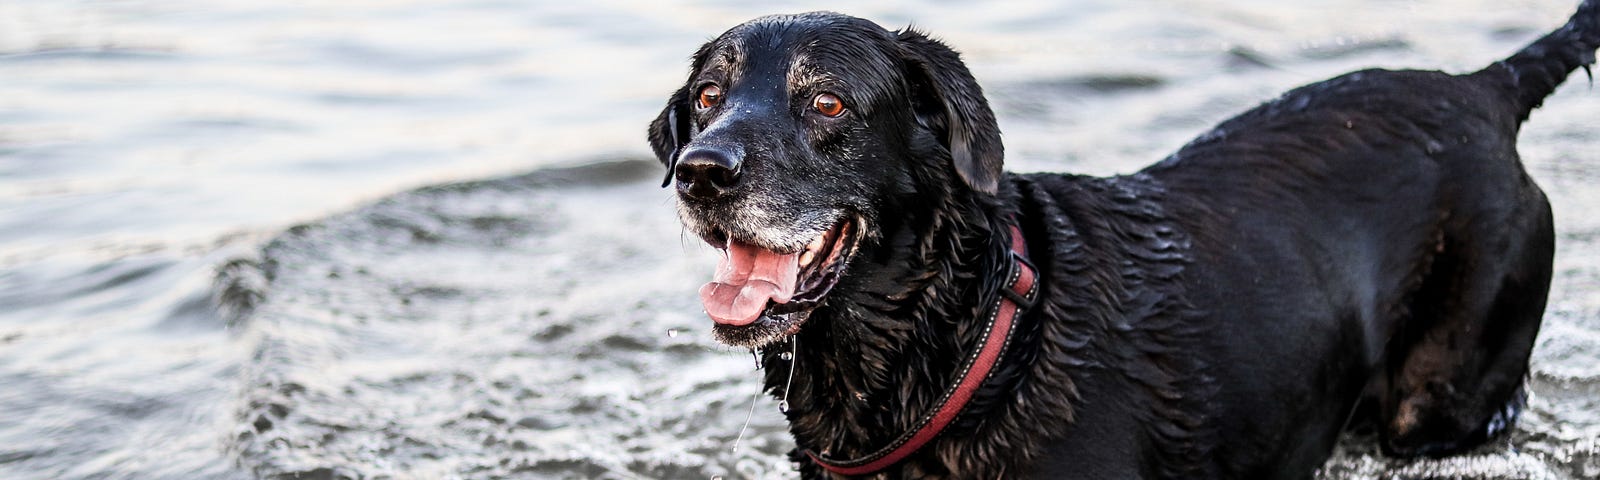 Black Lab with a grey muzzle and red collar, standing belly deep in water a stick floating in front of him